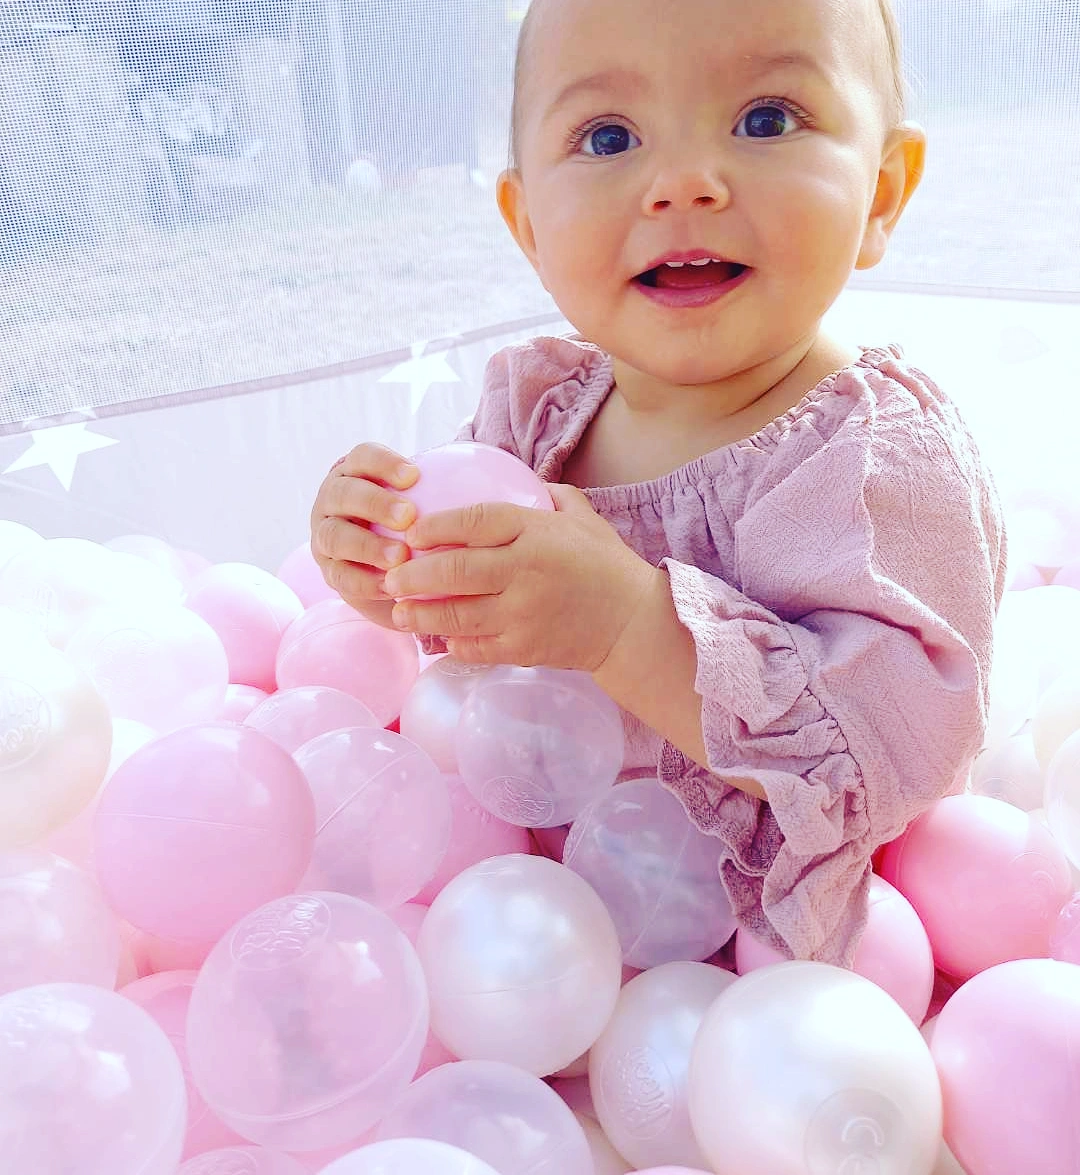 Joue, Peau, Lip, Bras, Photograph, Facial Expression, Blanc, Baby, Human Body, Sleeve, Baby & Toddler Clothing, Happy, Baby Playing With Toys, Rose, Gesture, Balloon, Bambin, Finger, Personne, Headwear